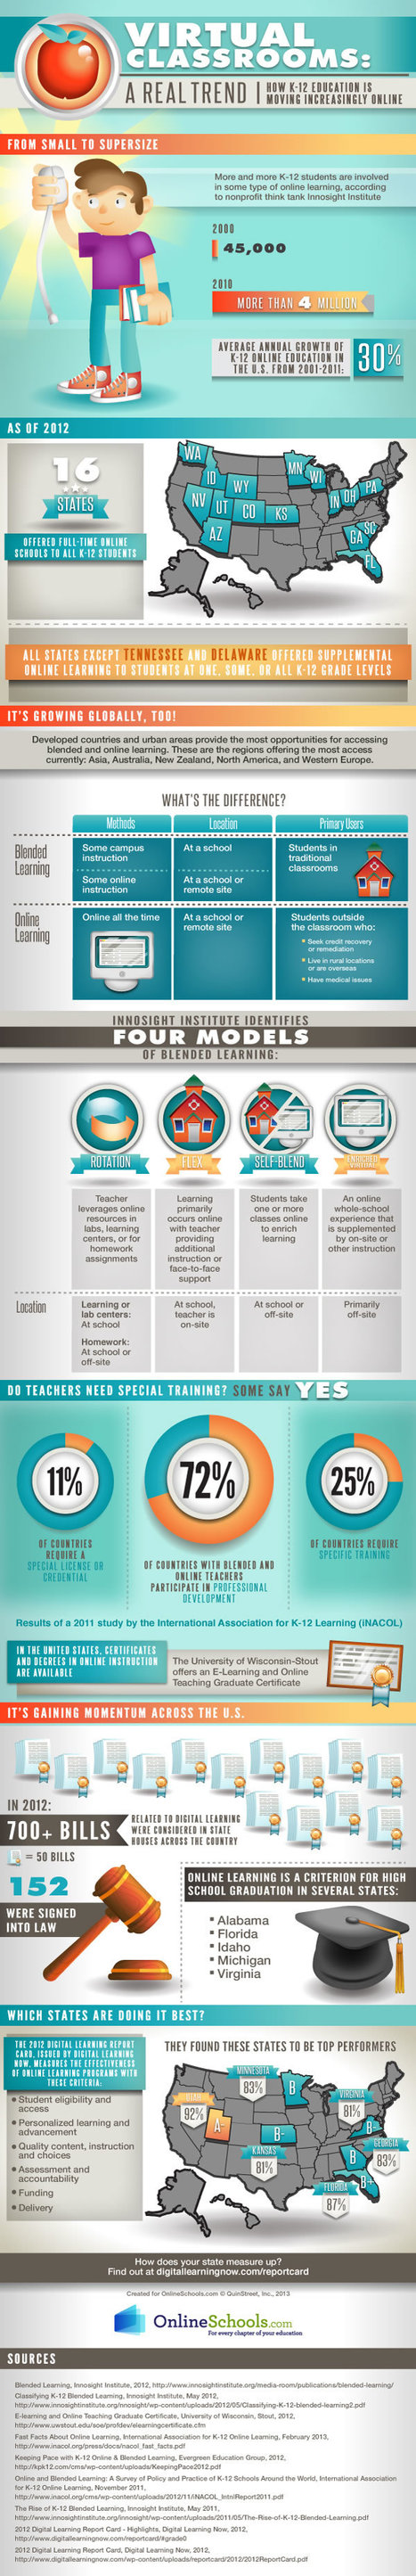 The Teacher's Quick Guide To Blended Learning [Infographic] | Pedalogica: educación y TIC | Scoop.it